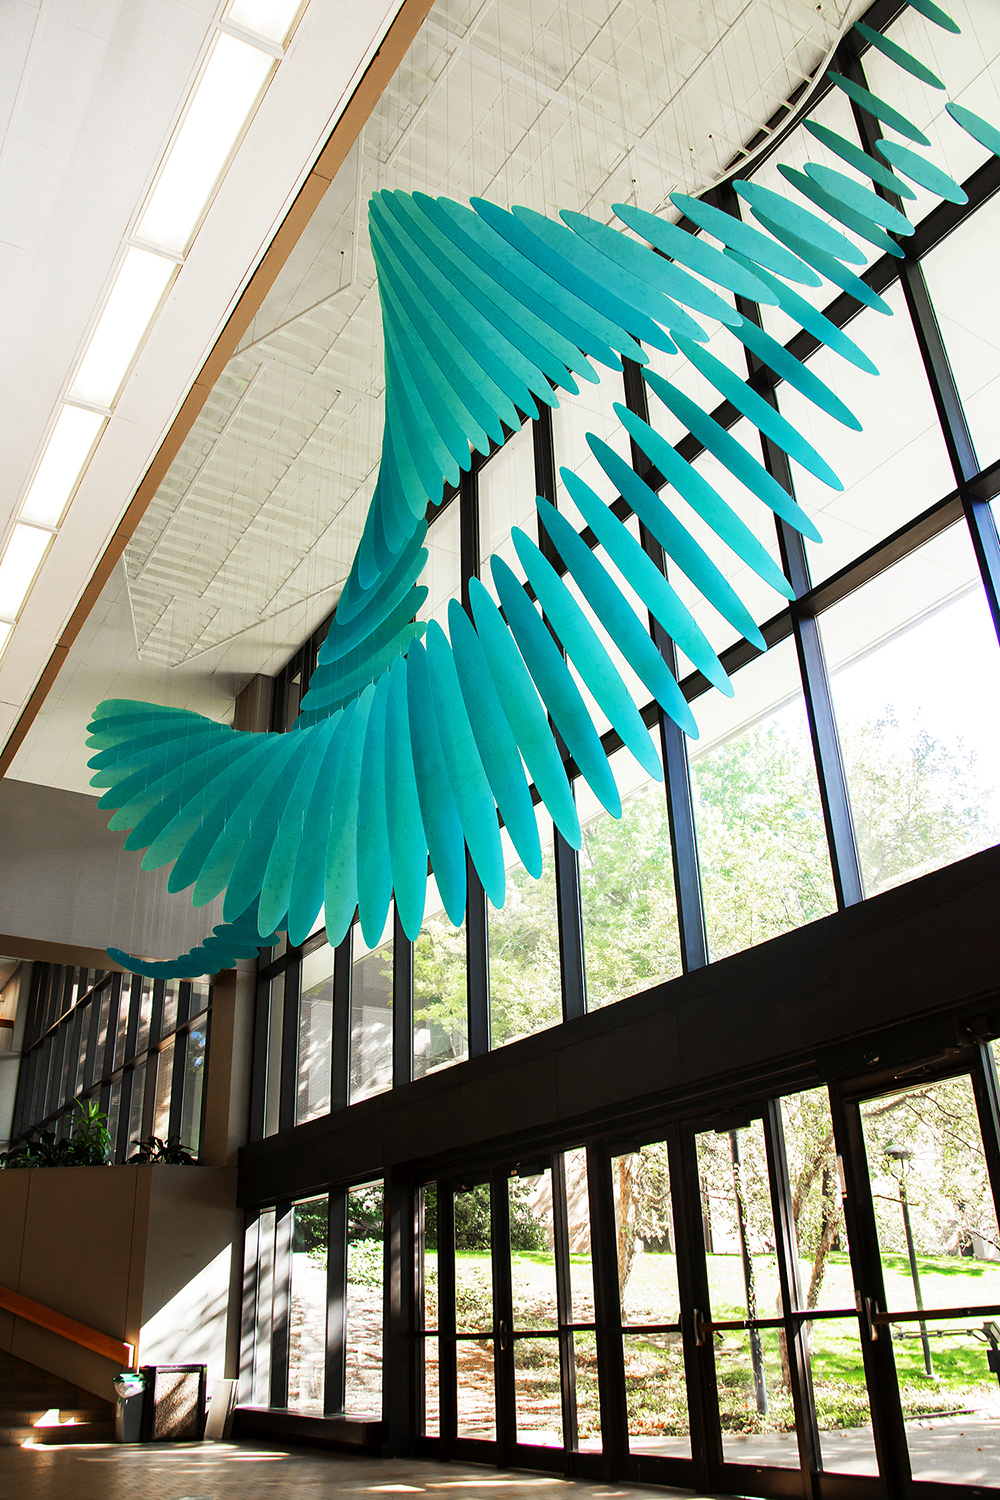 Cleveland State University Science Building – Commissioned Sculpture